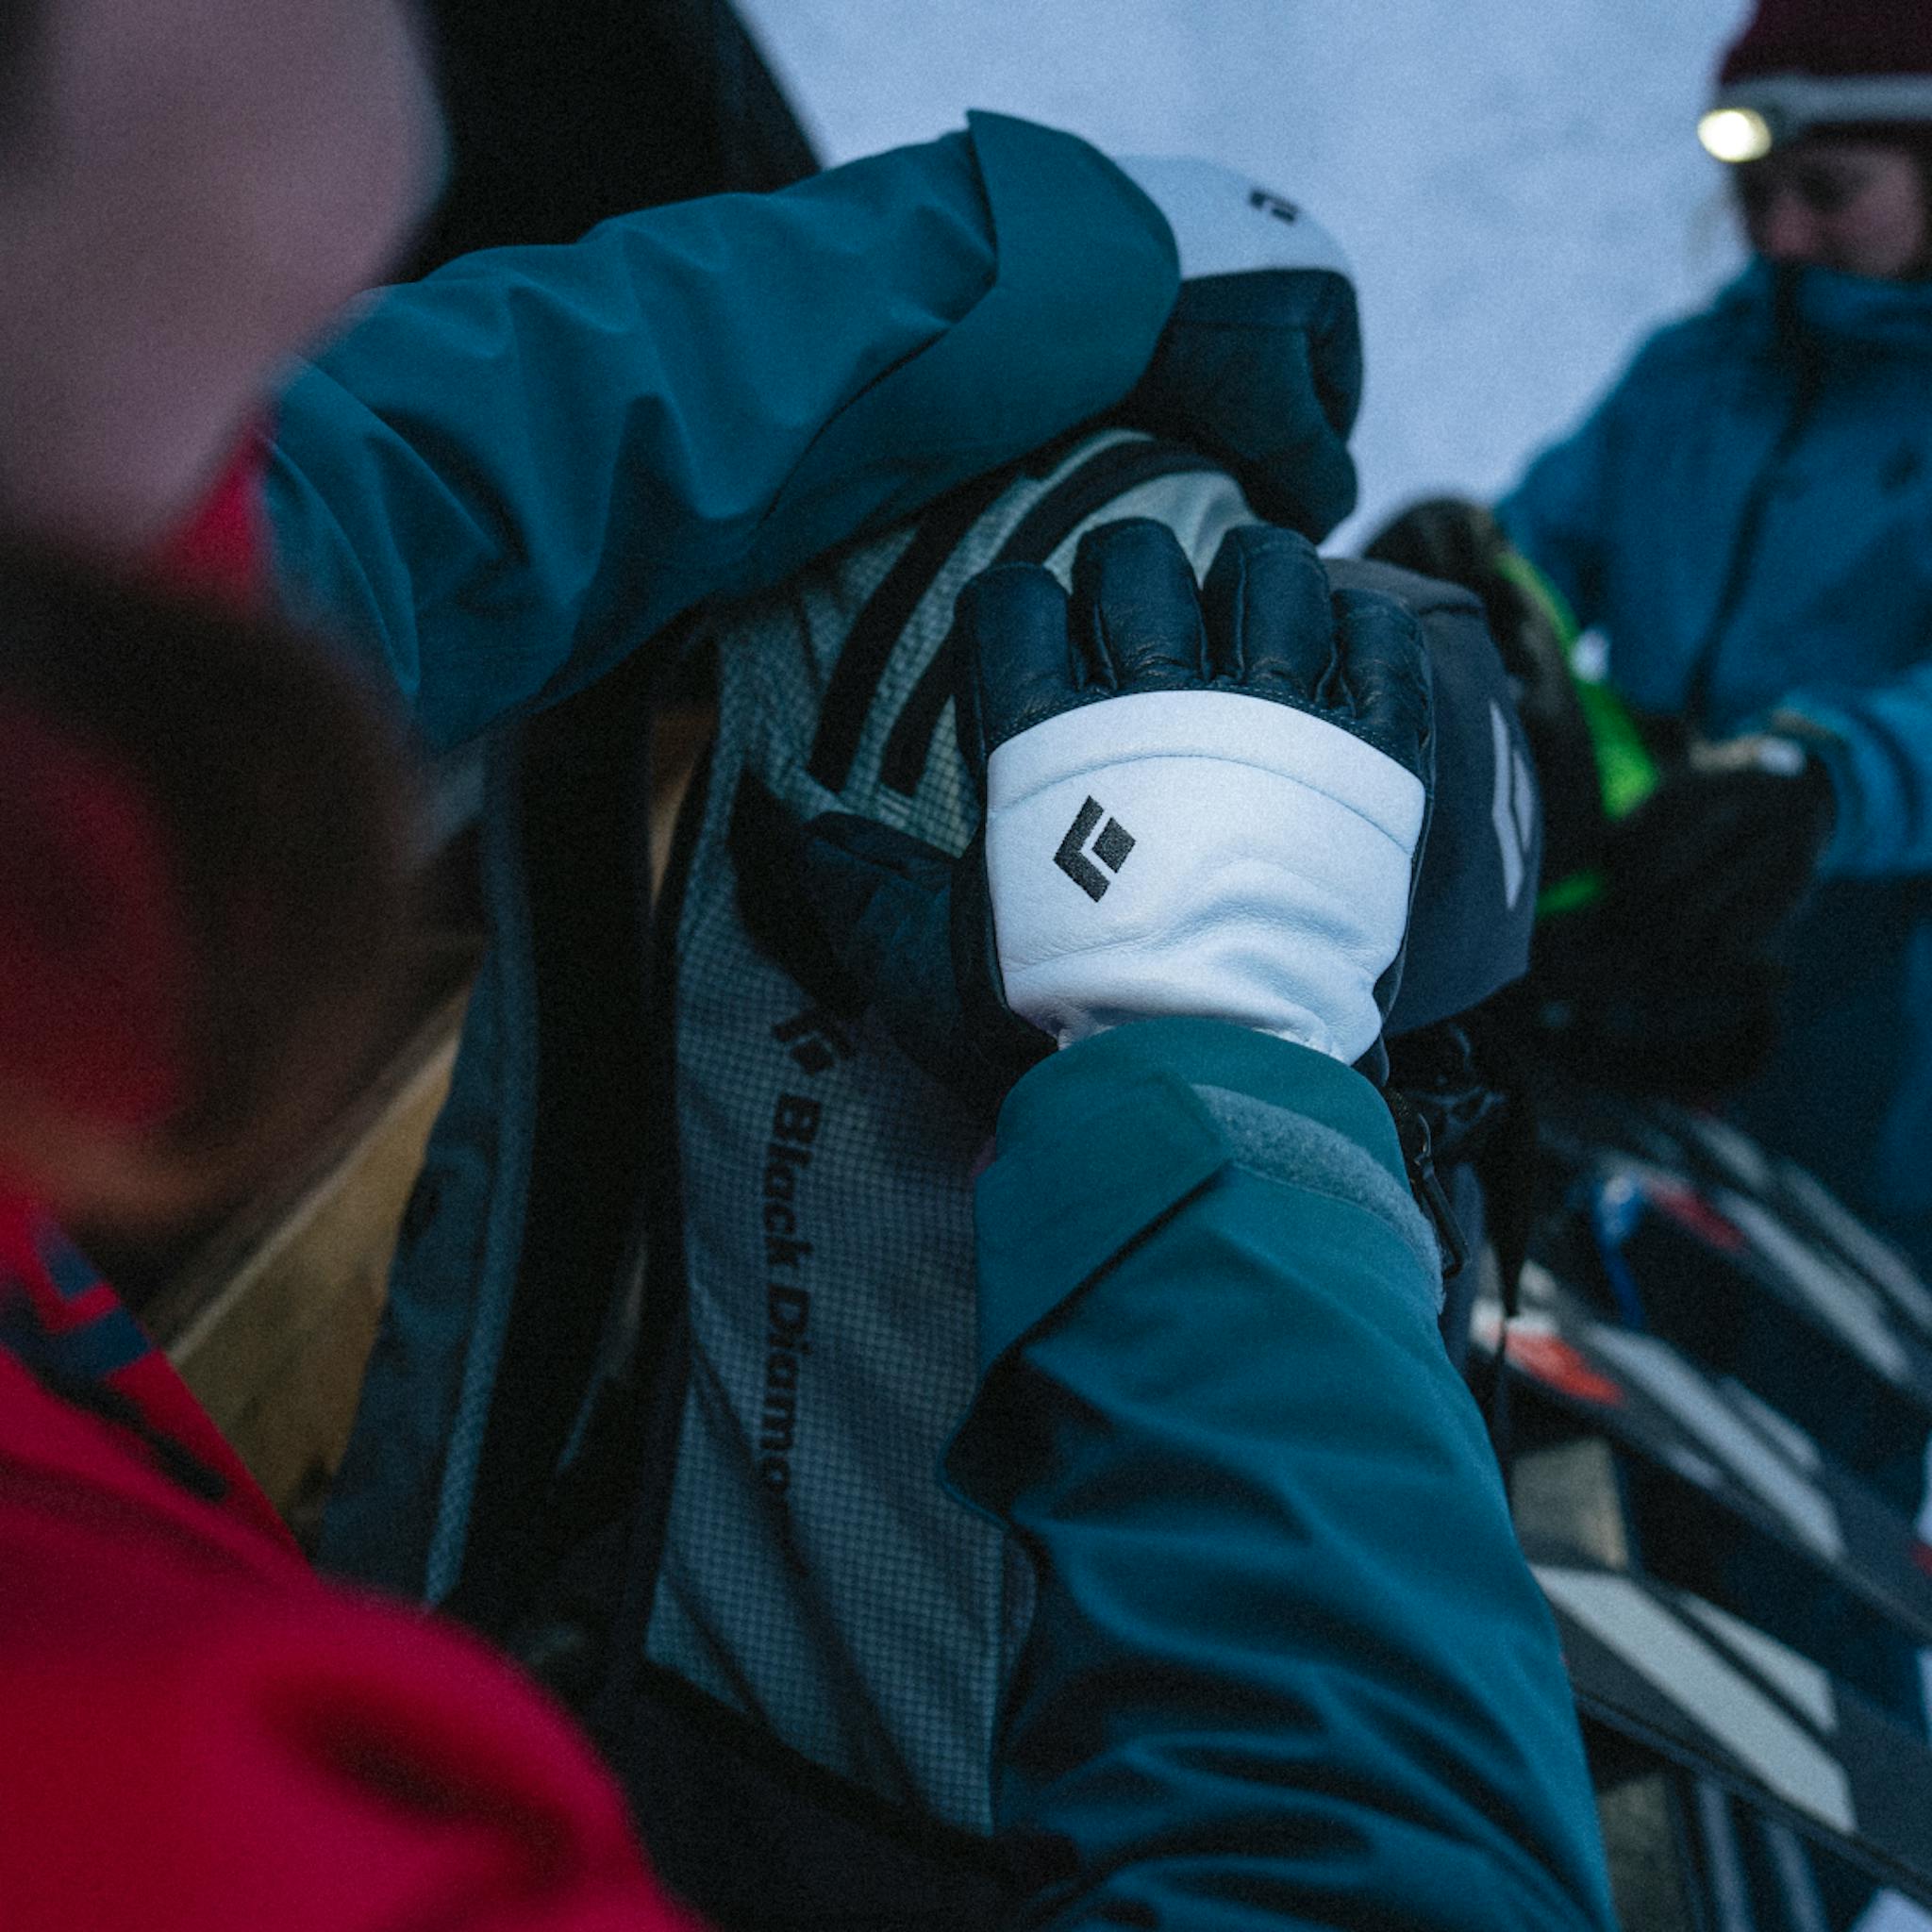 A skier in Women's Spark Gloves zips up her pack before a tour.